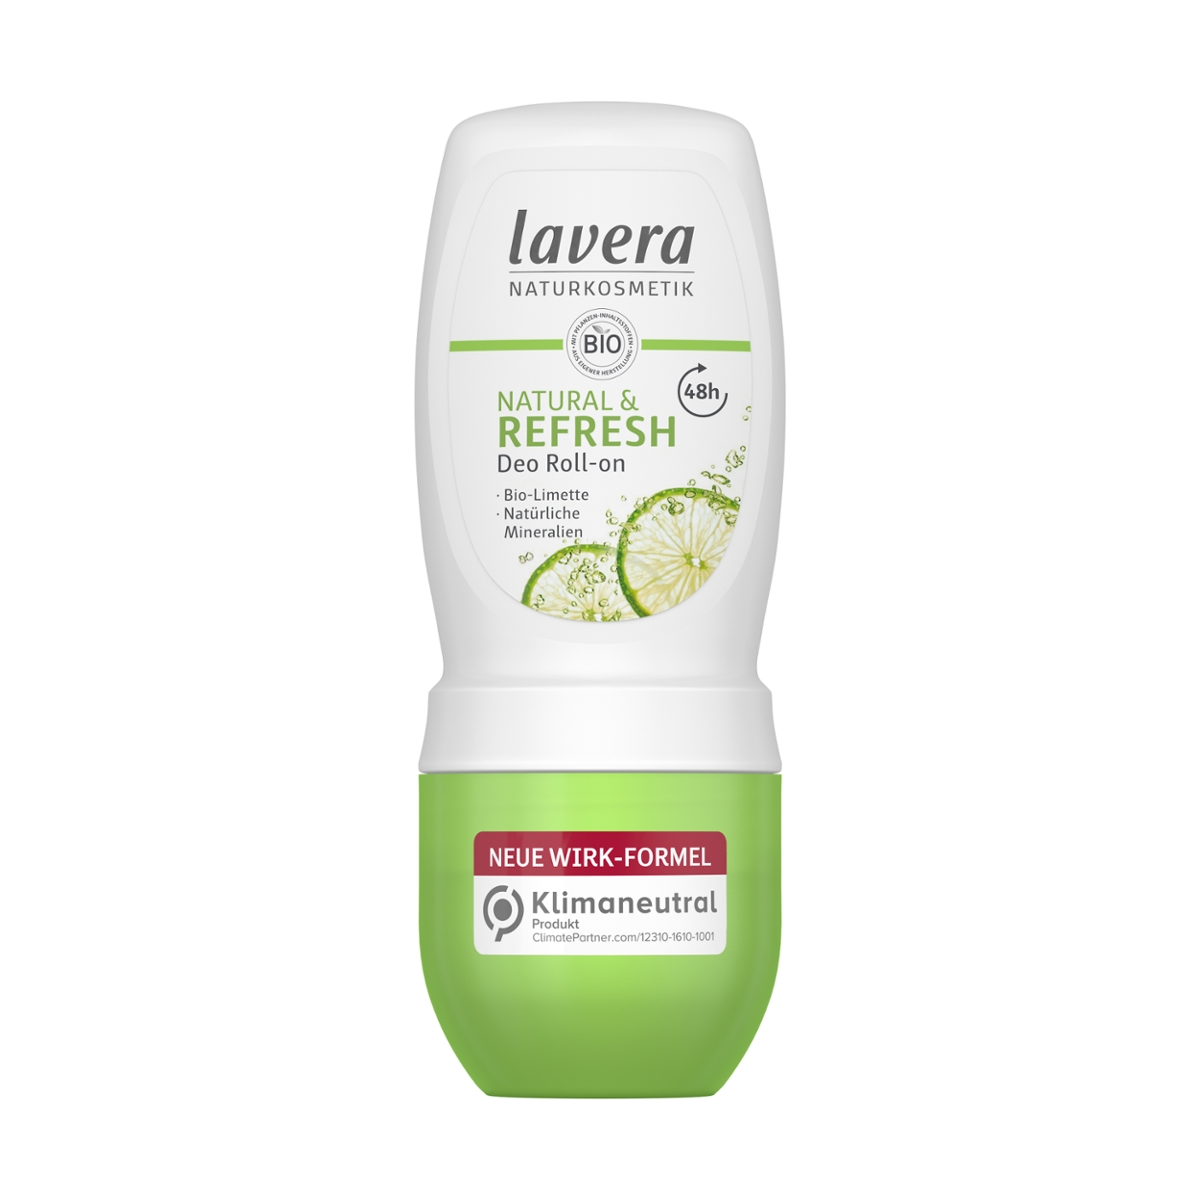 Lavera - Deo Roll-on Natural & REFRESH